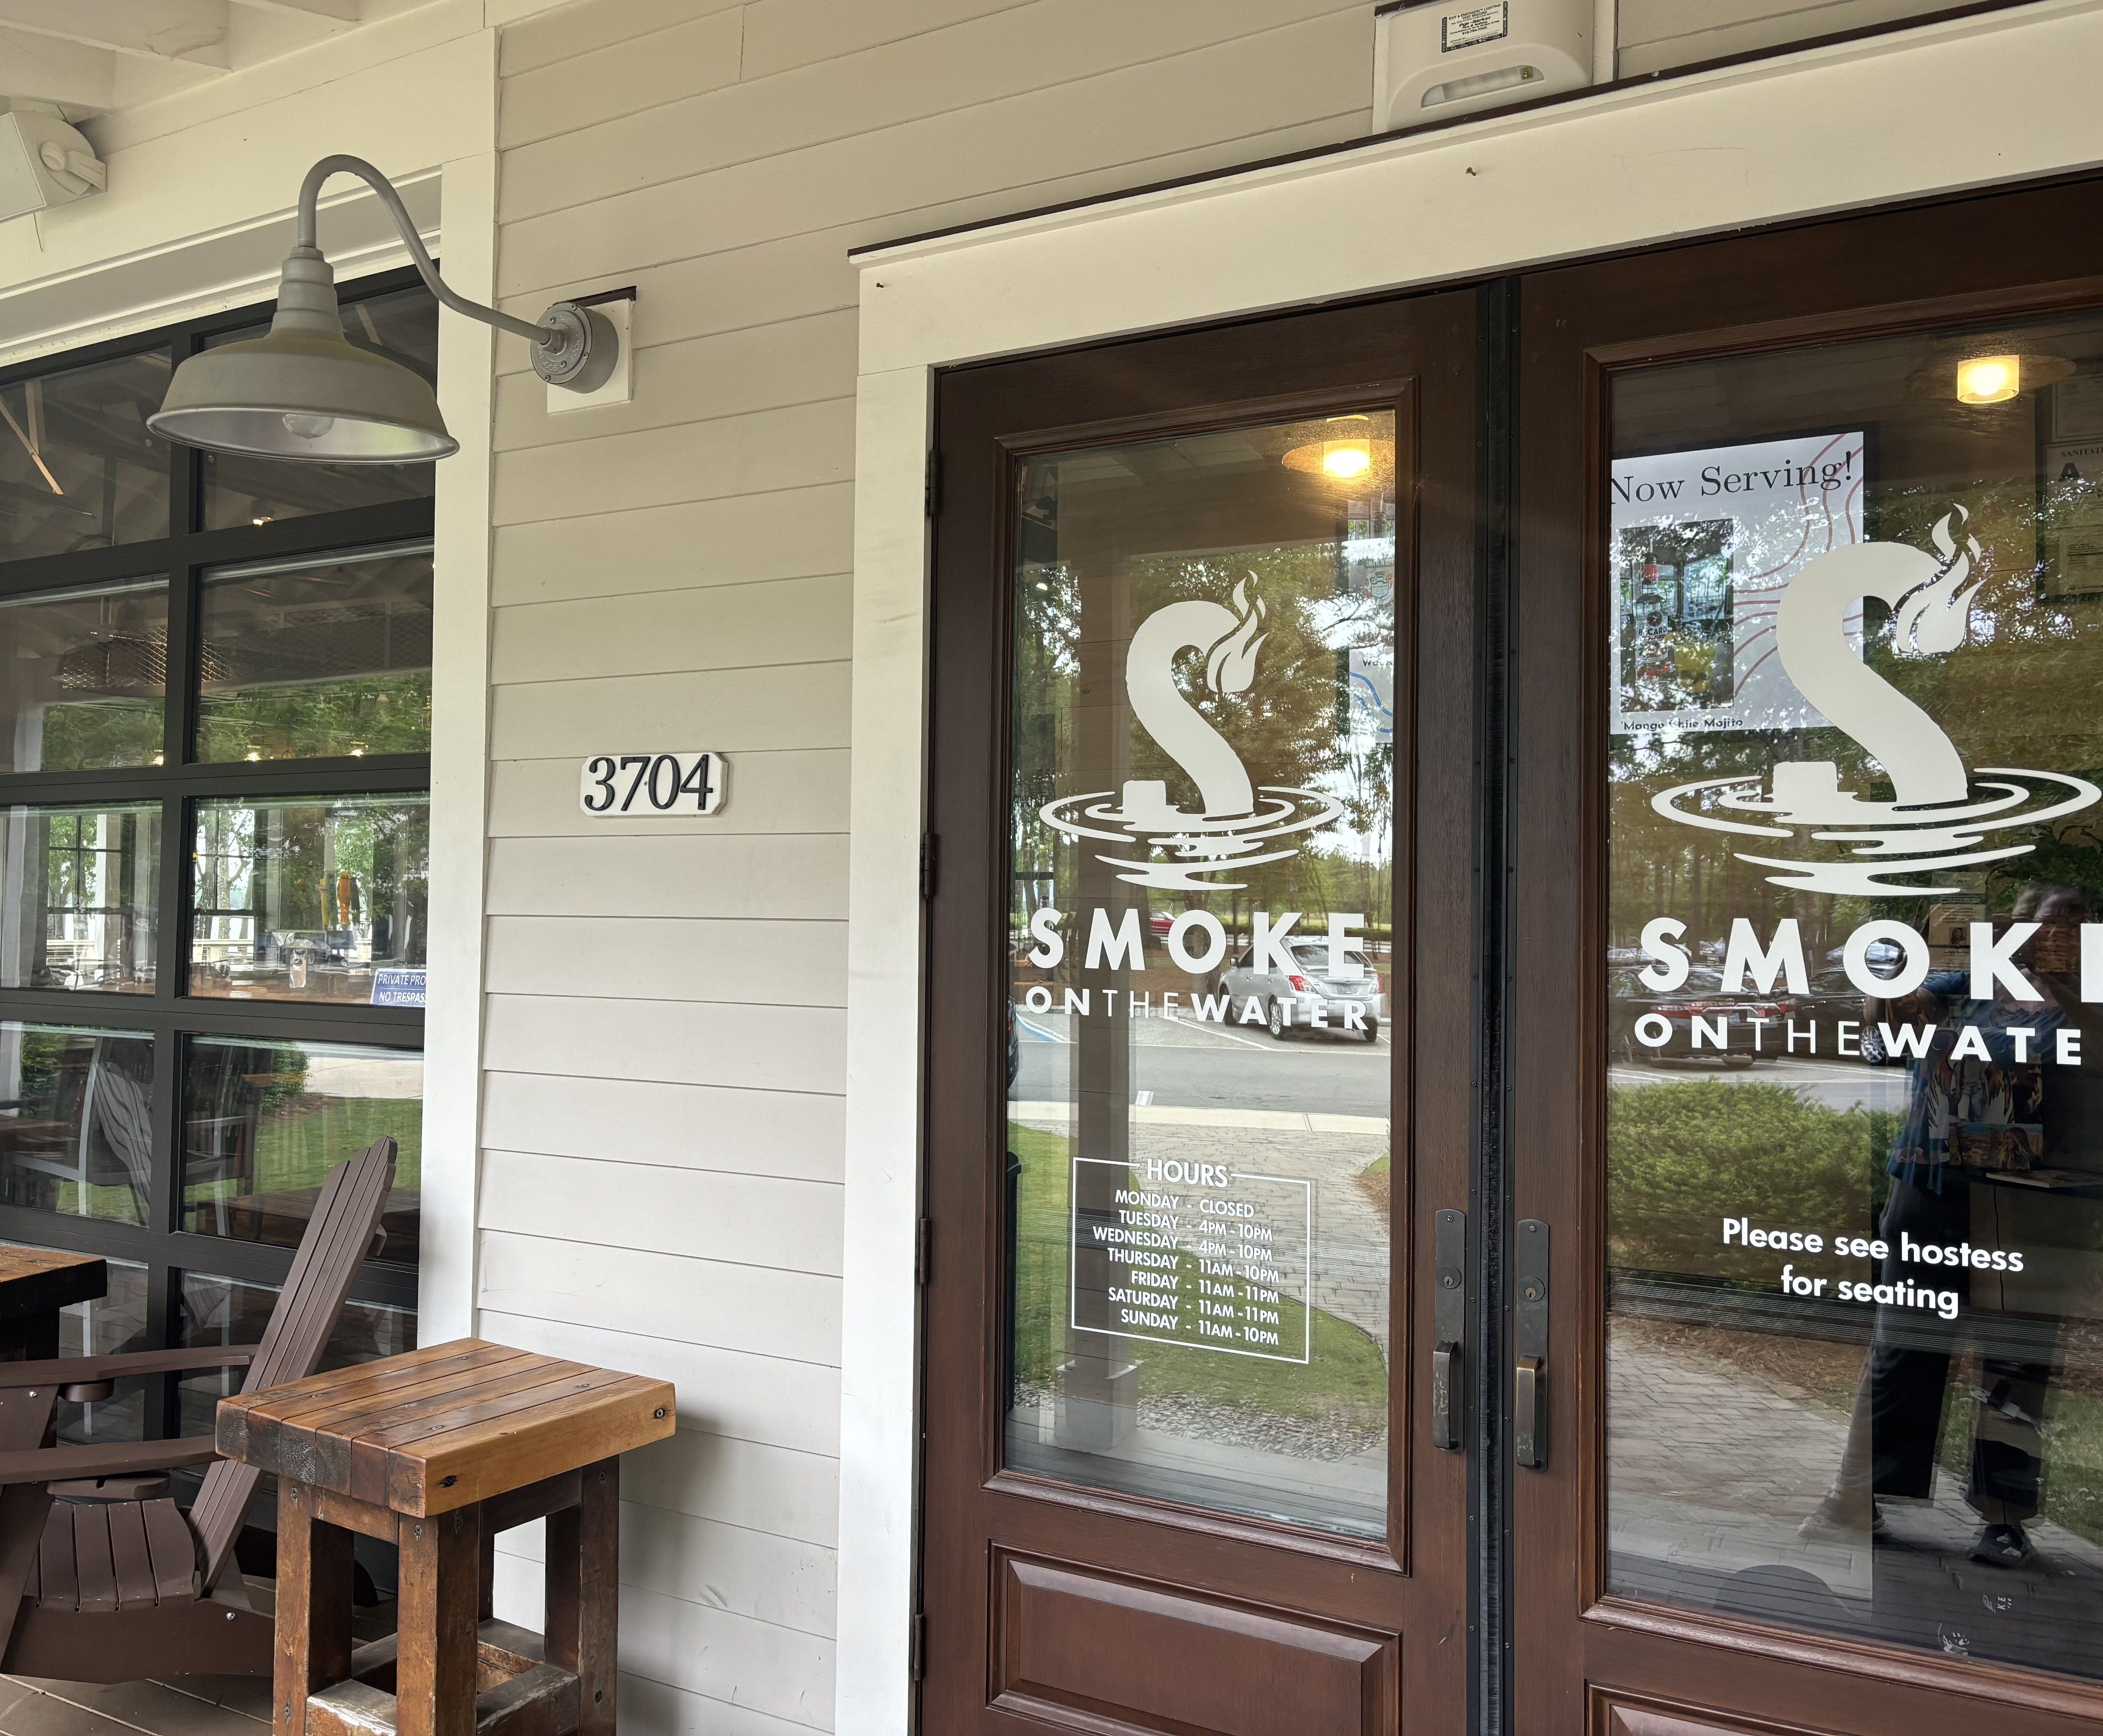 Changes are coming to Wilmington's Smoke on the Water restaurant. Here's what's ahead.